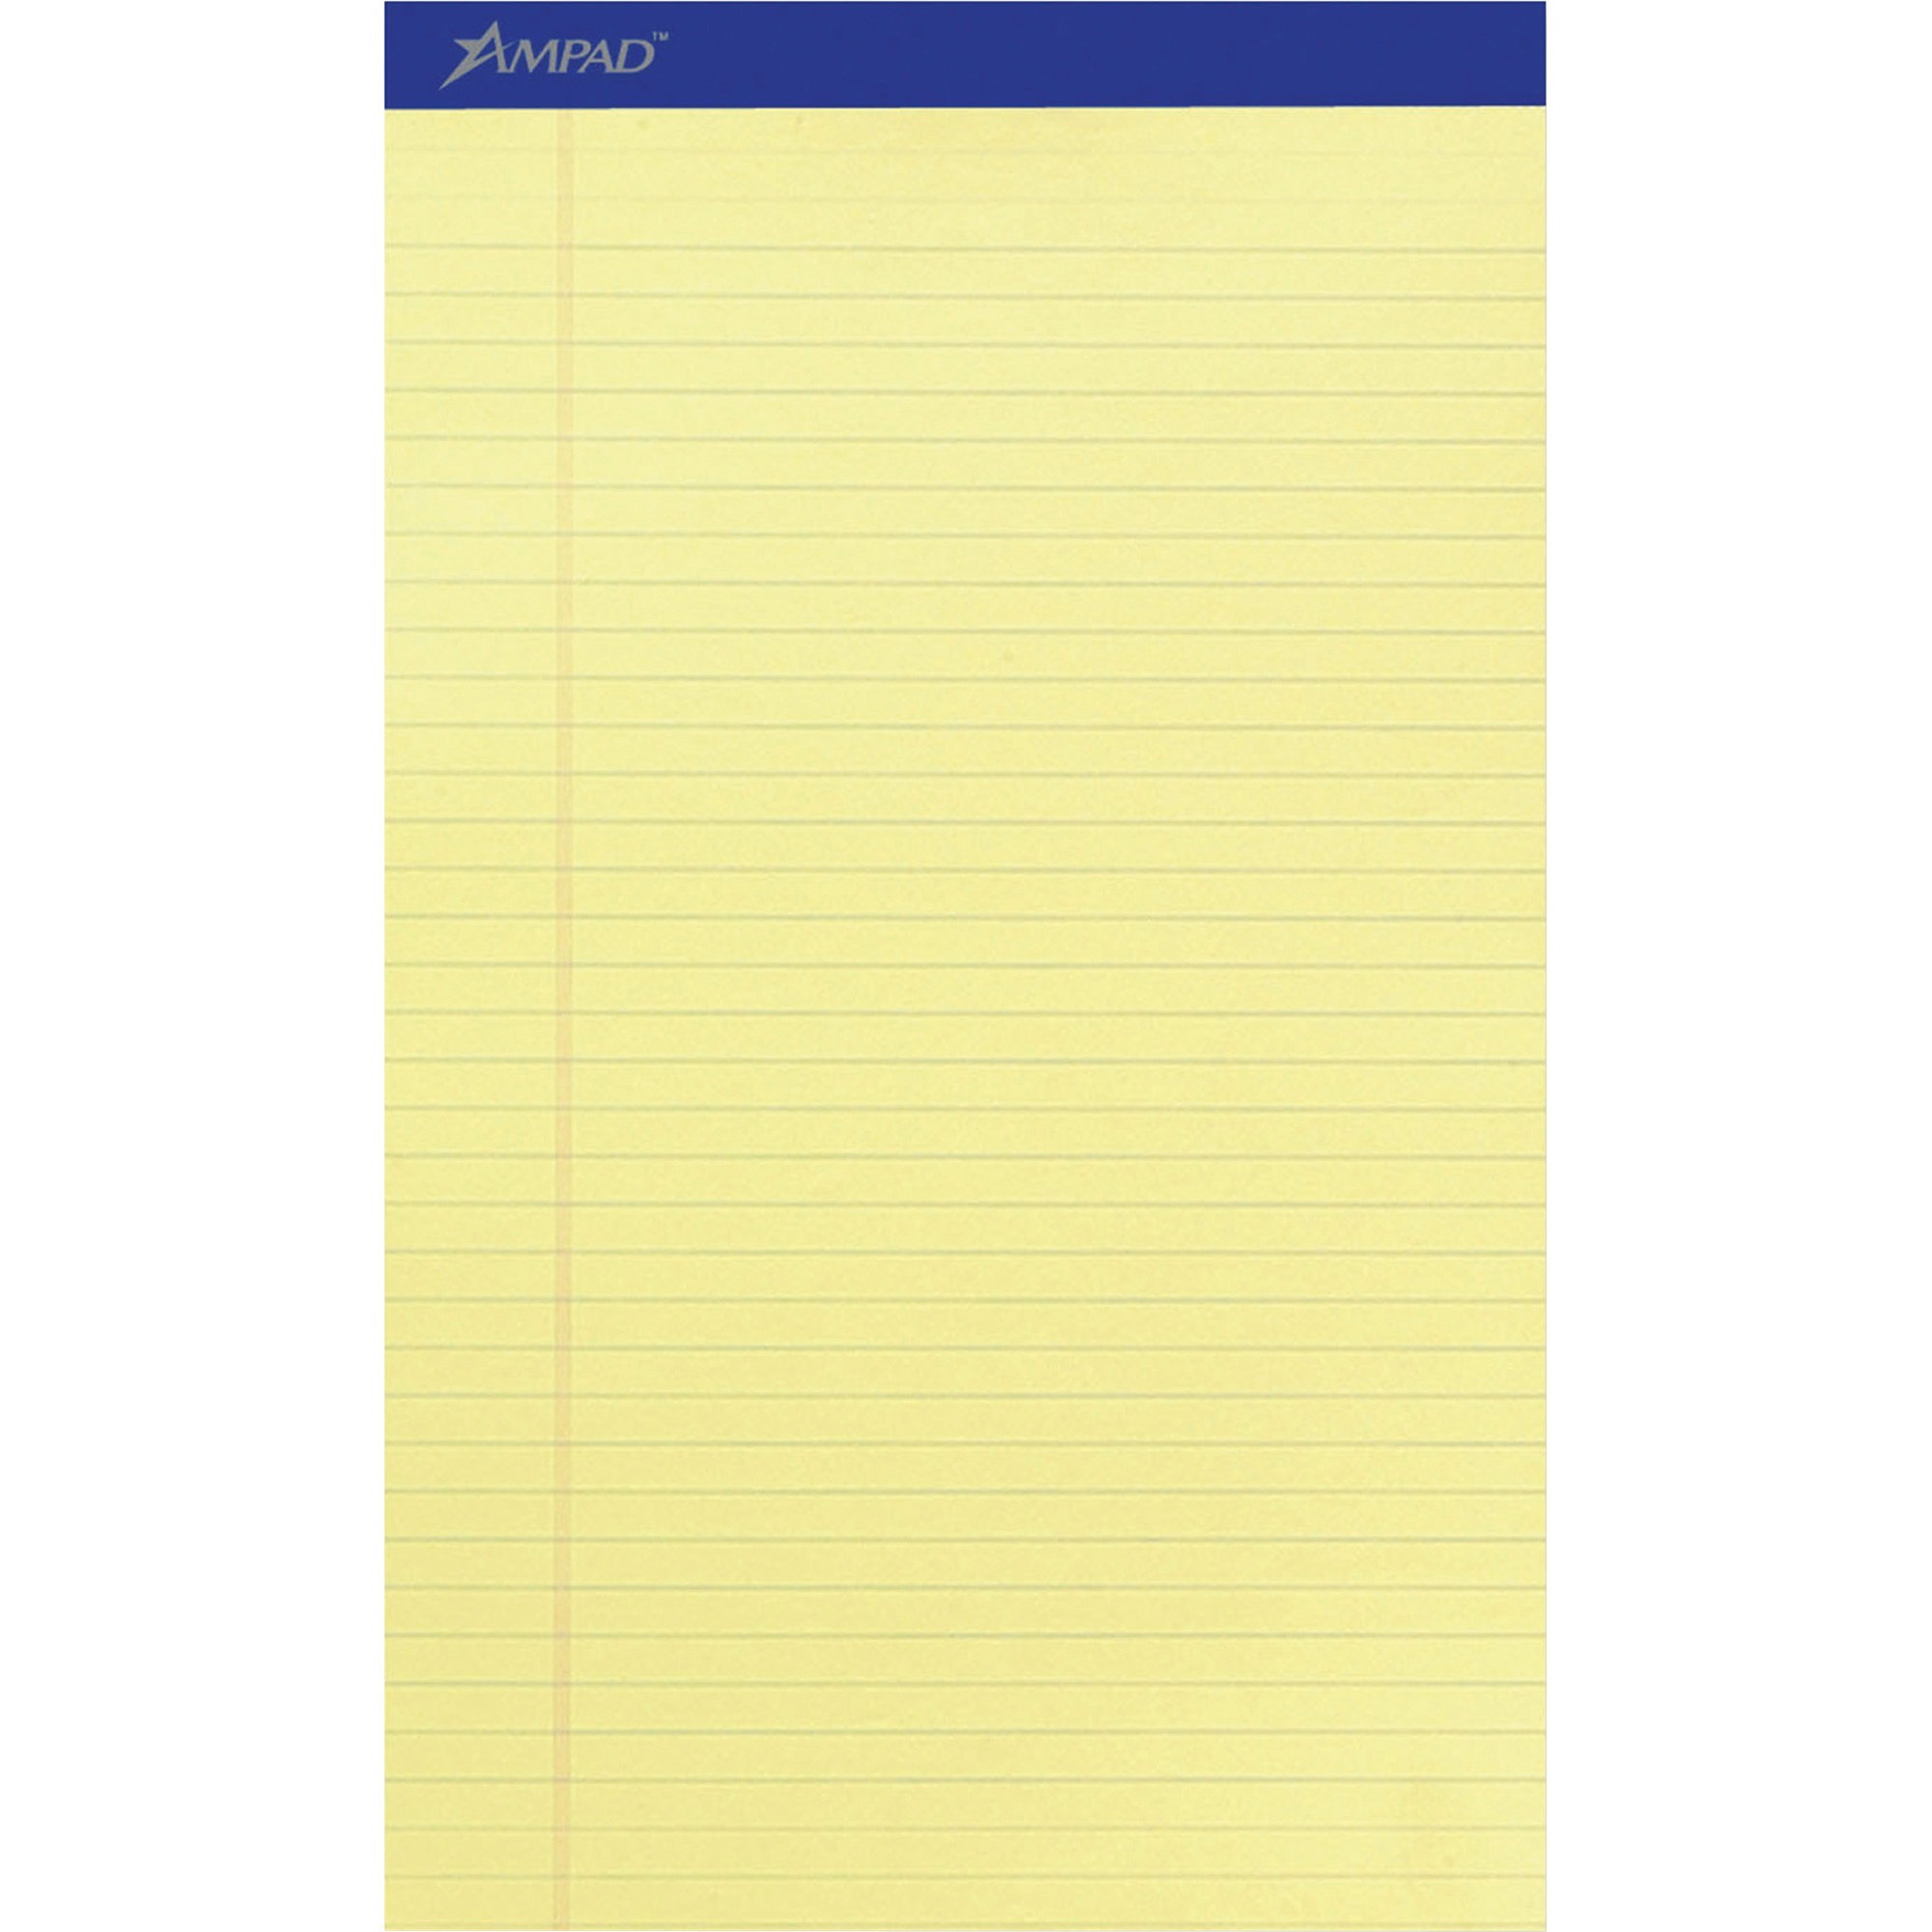 Ampad Writing Pad - 50 Sheets - Stapled - 0.34" Ruled - 15 lb Basis Weight - Legal - 8 1/2" x 14" - Canary Yellow Paper - Dark B